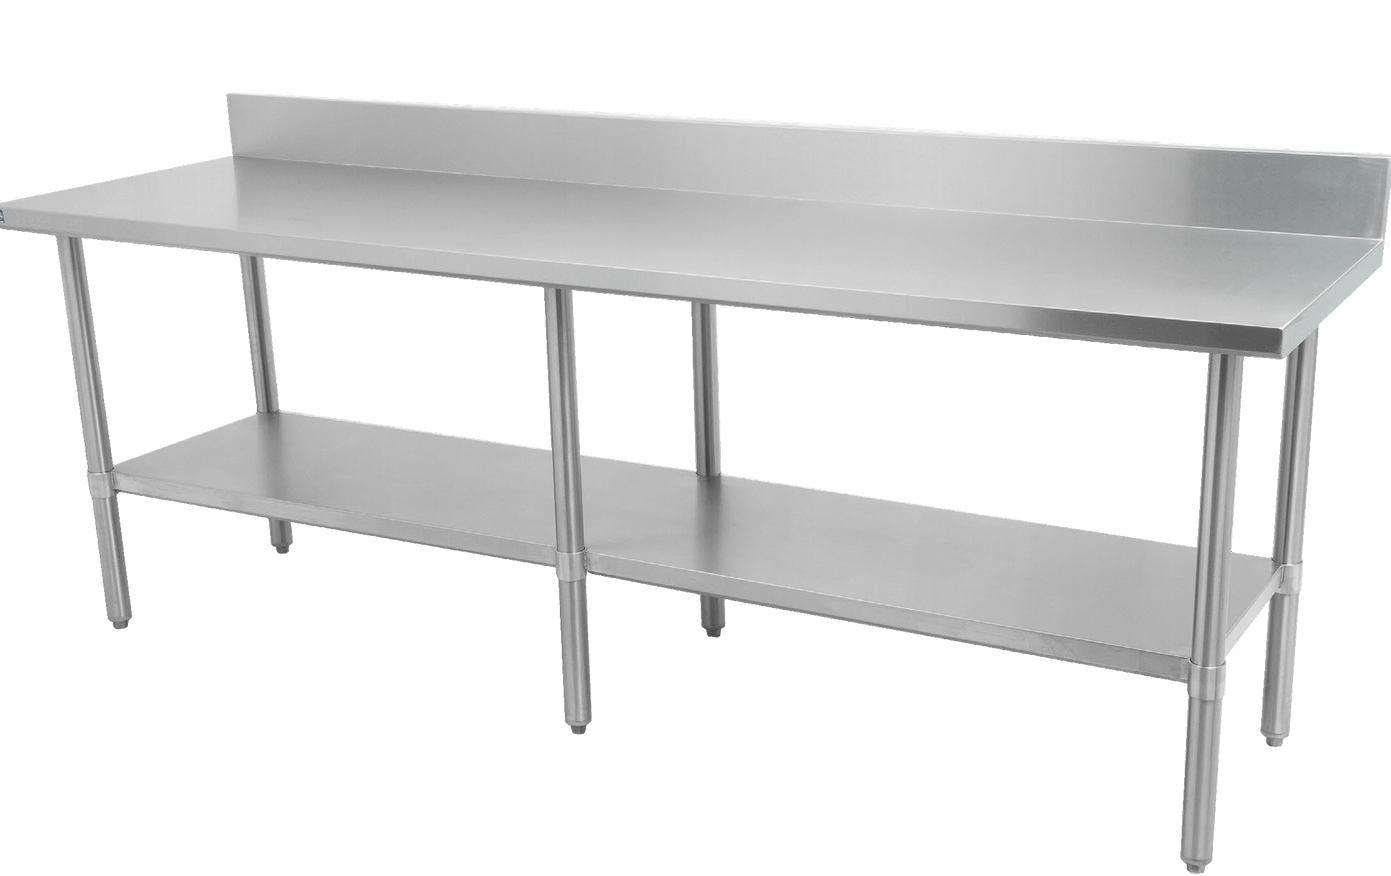 Thorinox DSST-3072-GS Table, 72"W x 30"D x 34"H, Stainless Steel Table with Galvanized Shelf